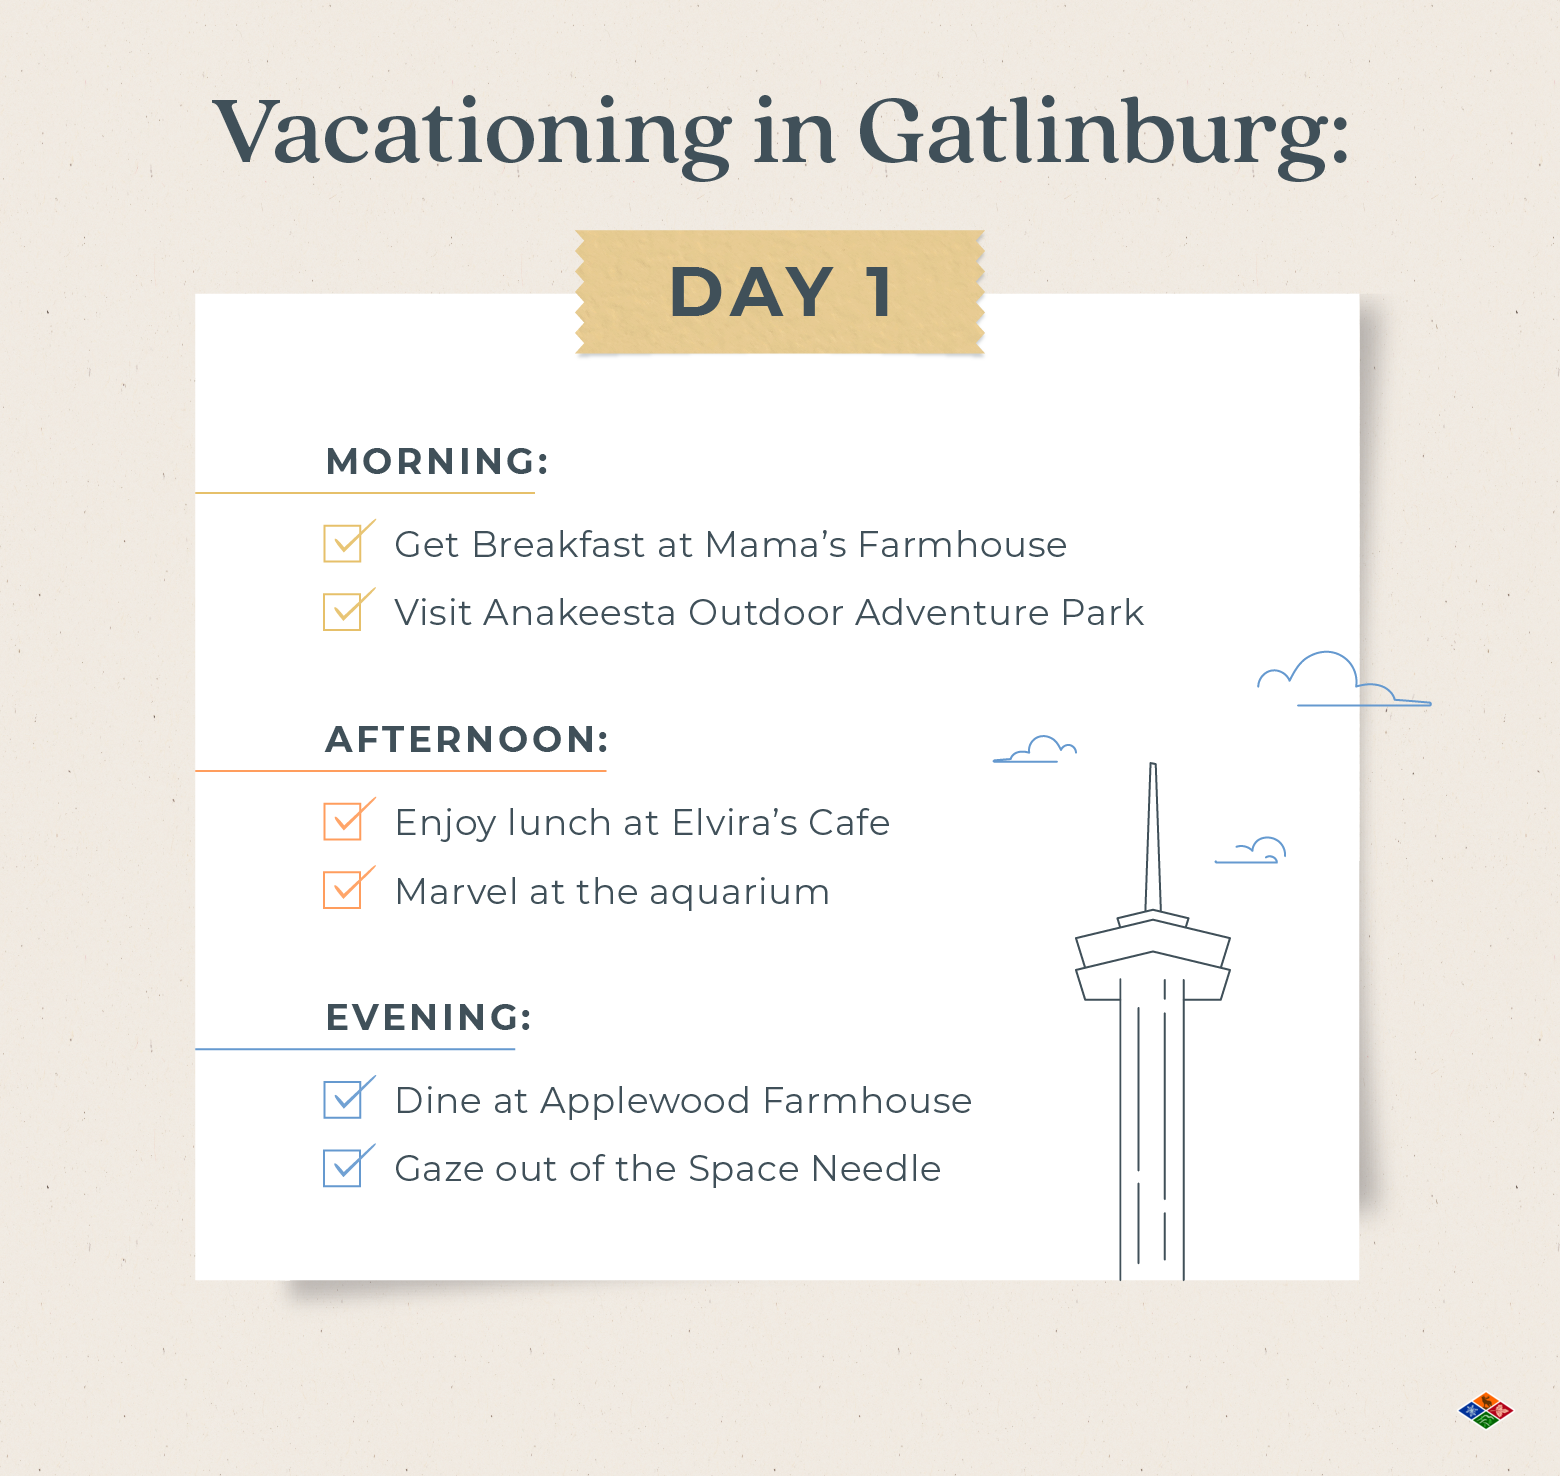  A graphic shows the day one itinerary for vacationing in Gatlinburg.